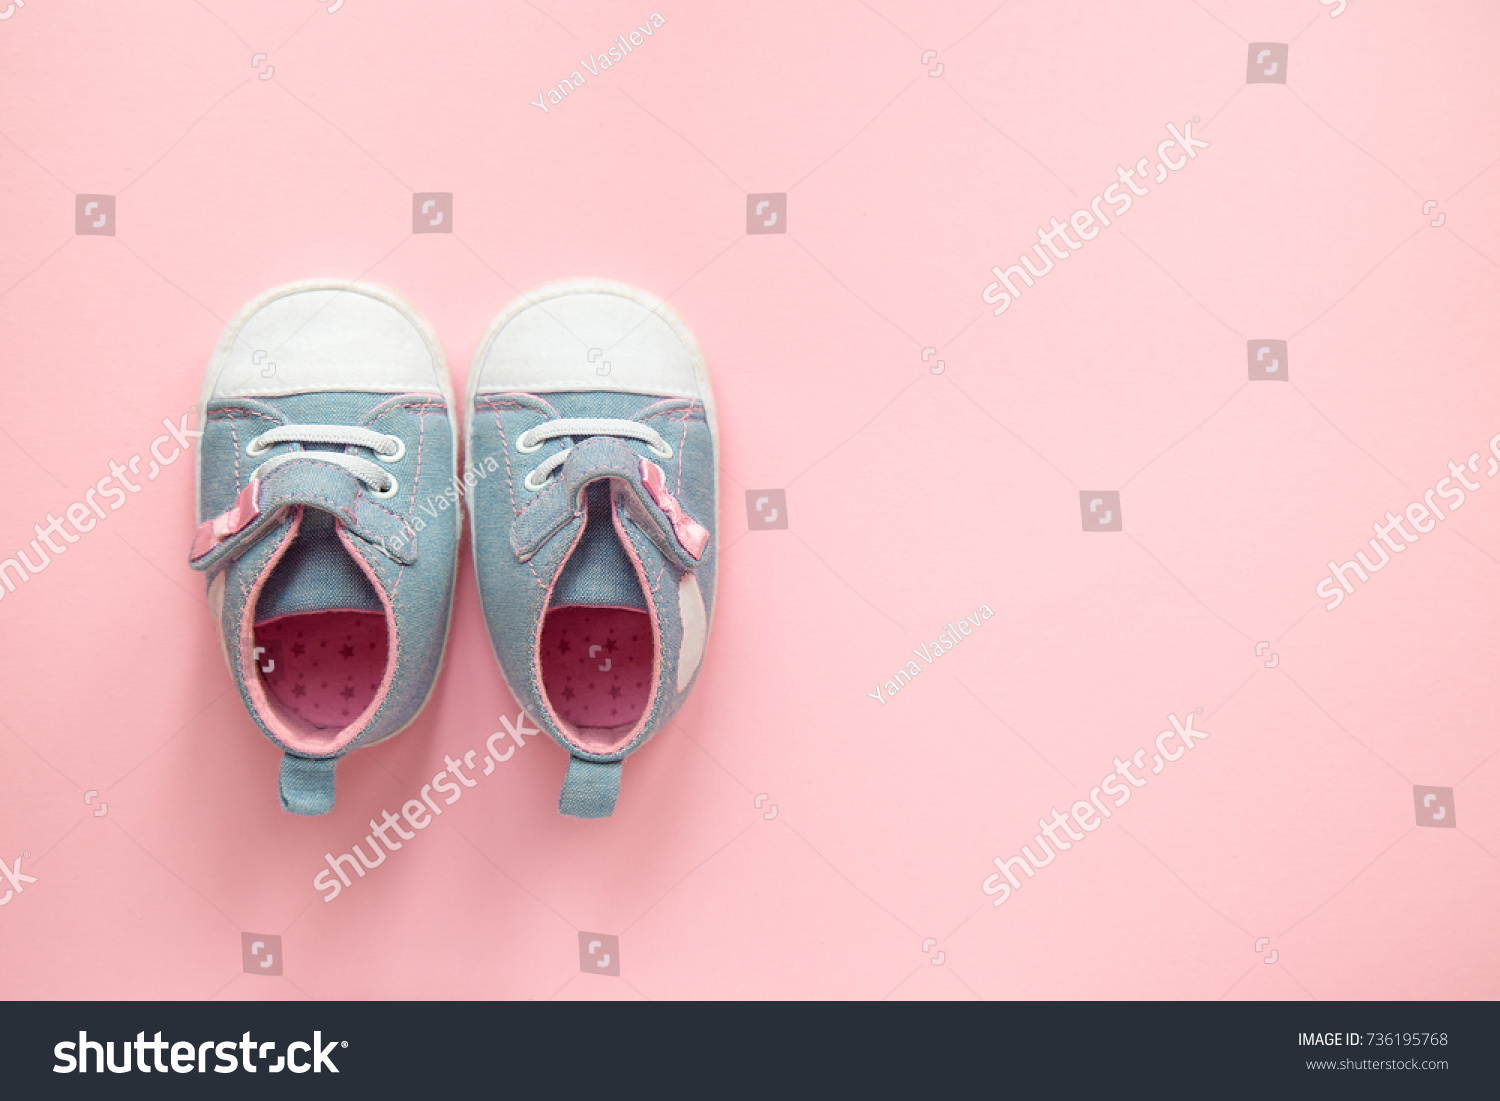 Children's denim sports shoes for girls, stands on a pink background. closeup view from the top. the concept of children's clothing. #736195768